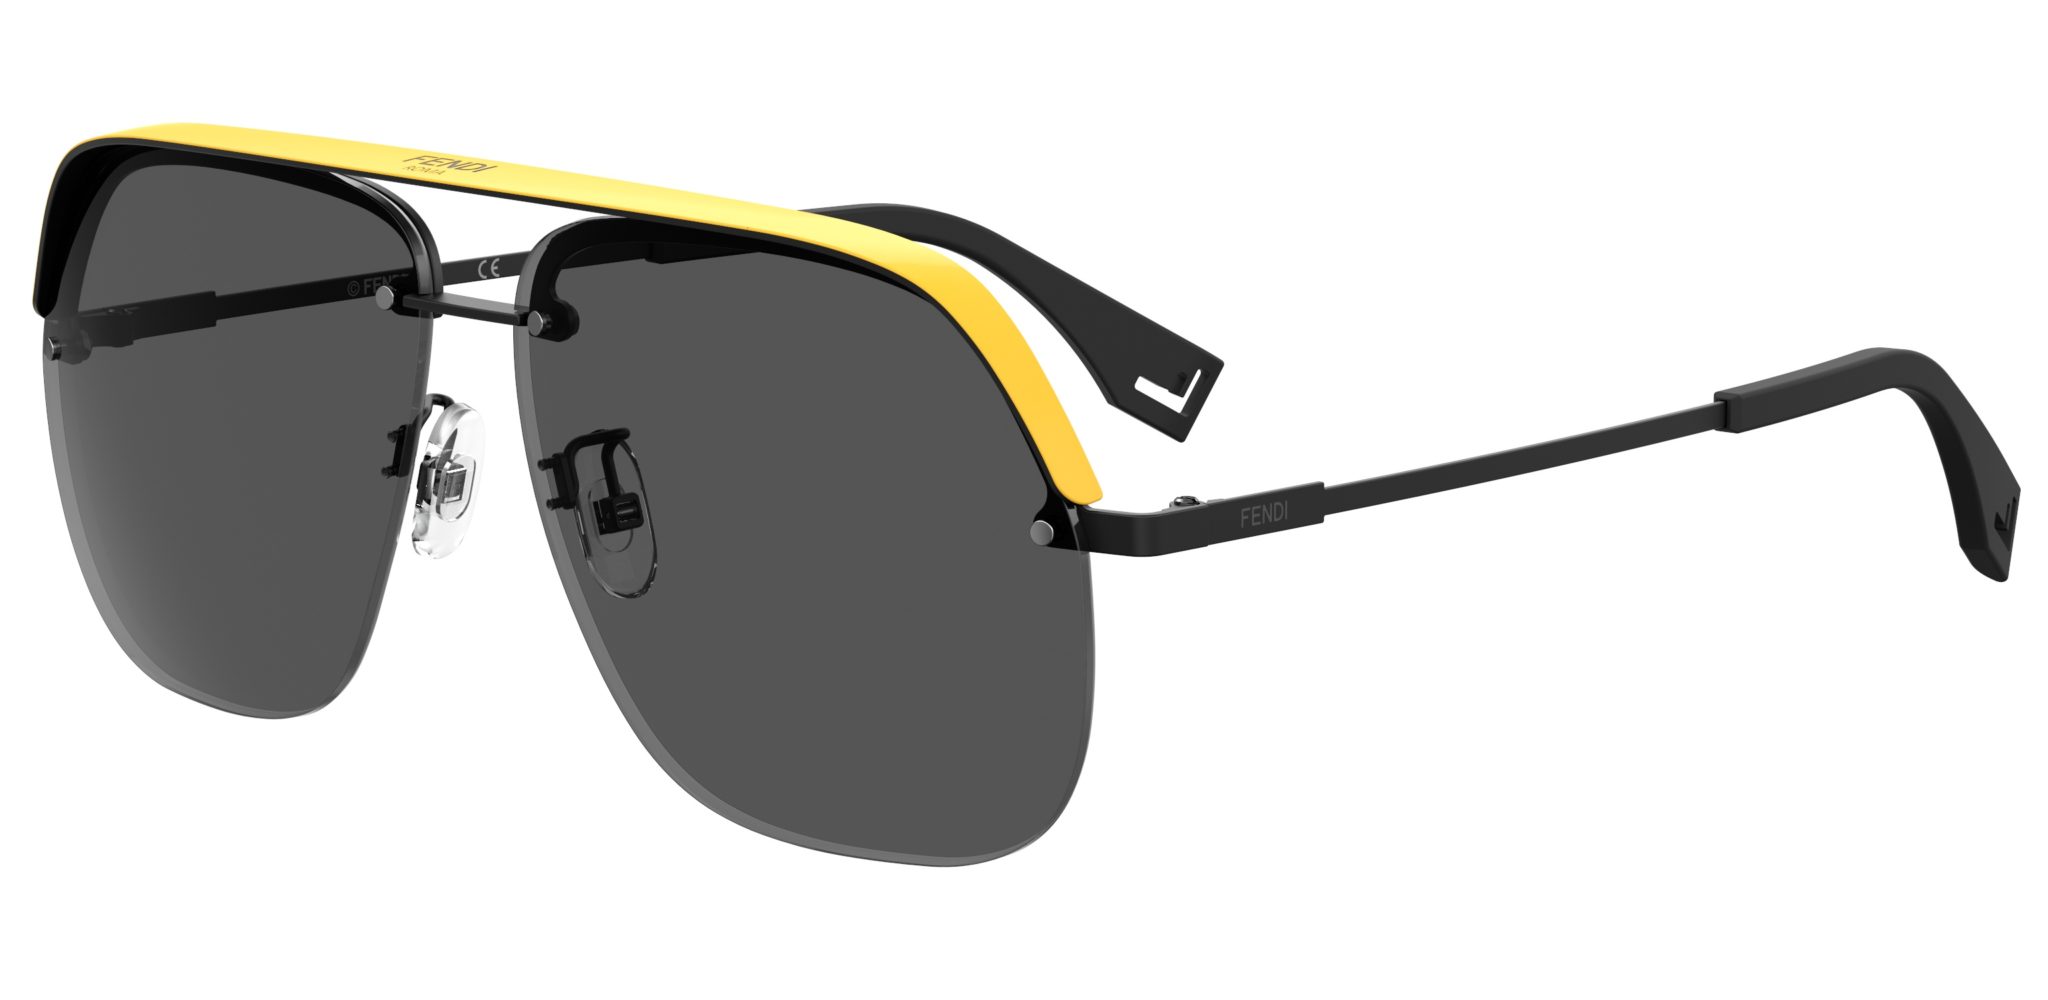 11-FENDI PACK SUNGLASSES-MEN'S FW20-21 – A Shaded View on Fashion